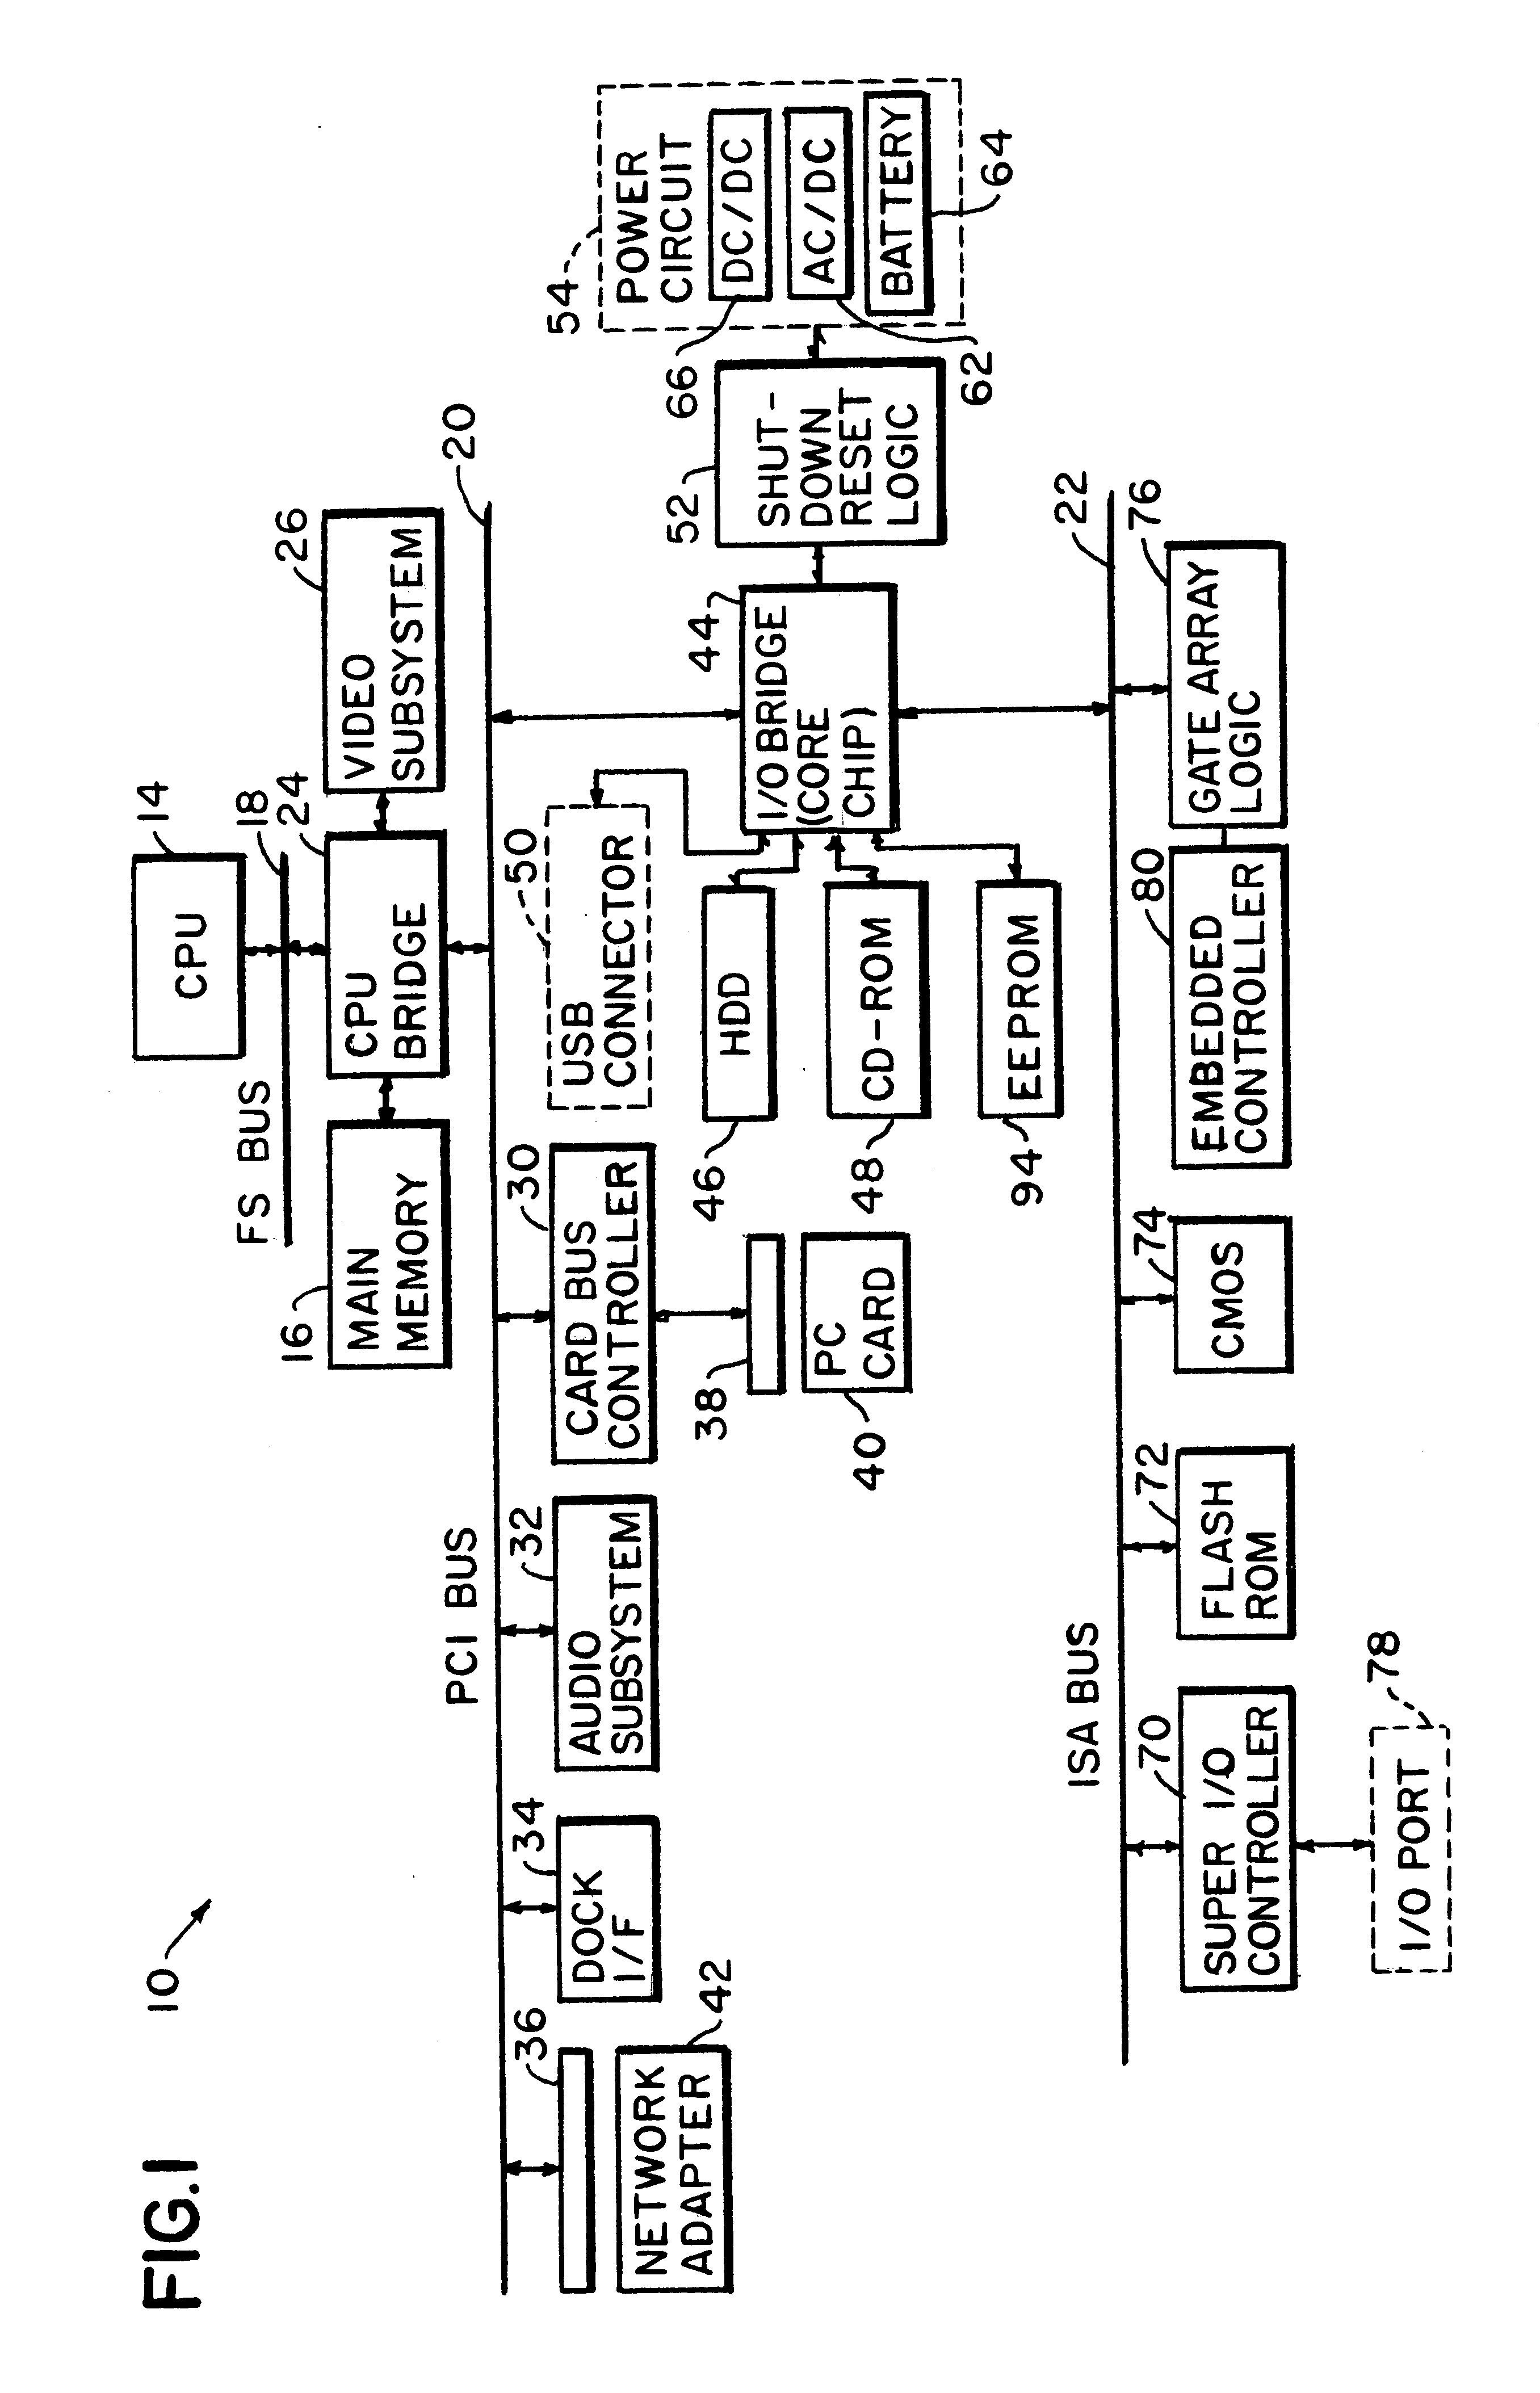 Computer and power control method for executing predetermined process in said computer prior to turning off its power